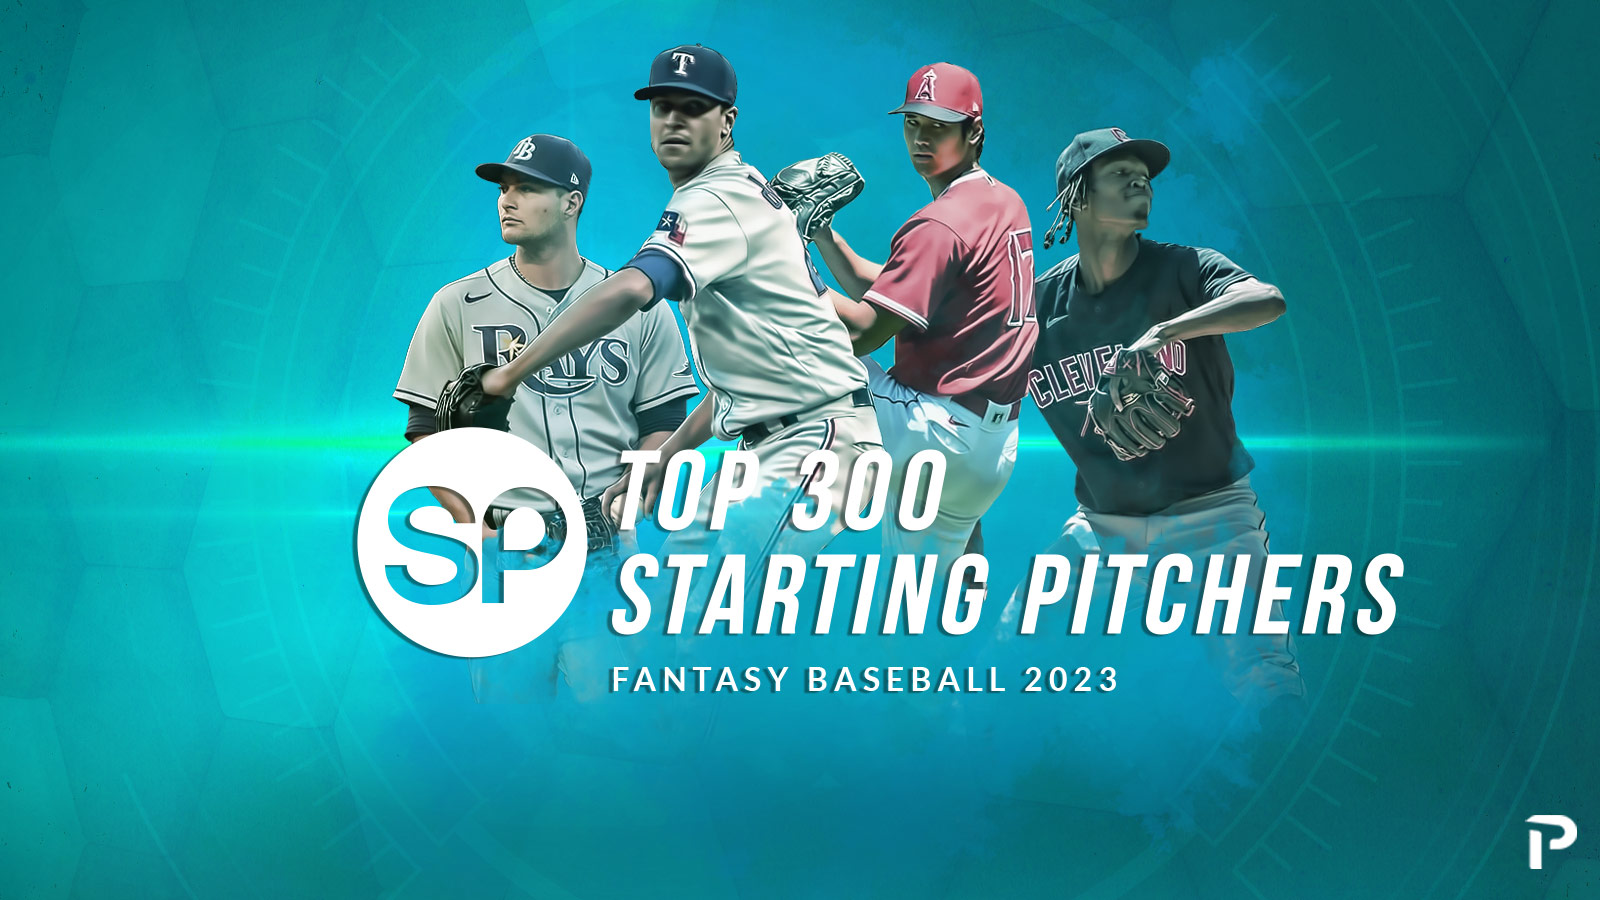 Top 300 Fantasy Baseball Starting Pitchers For 2023